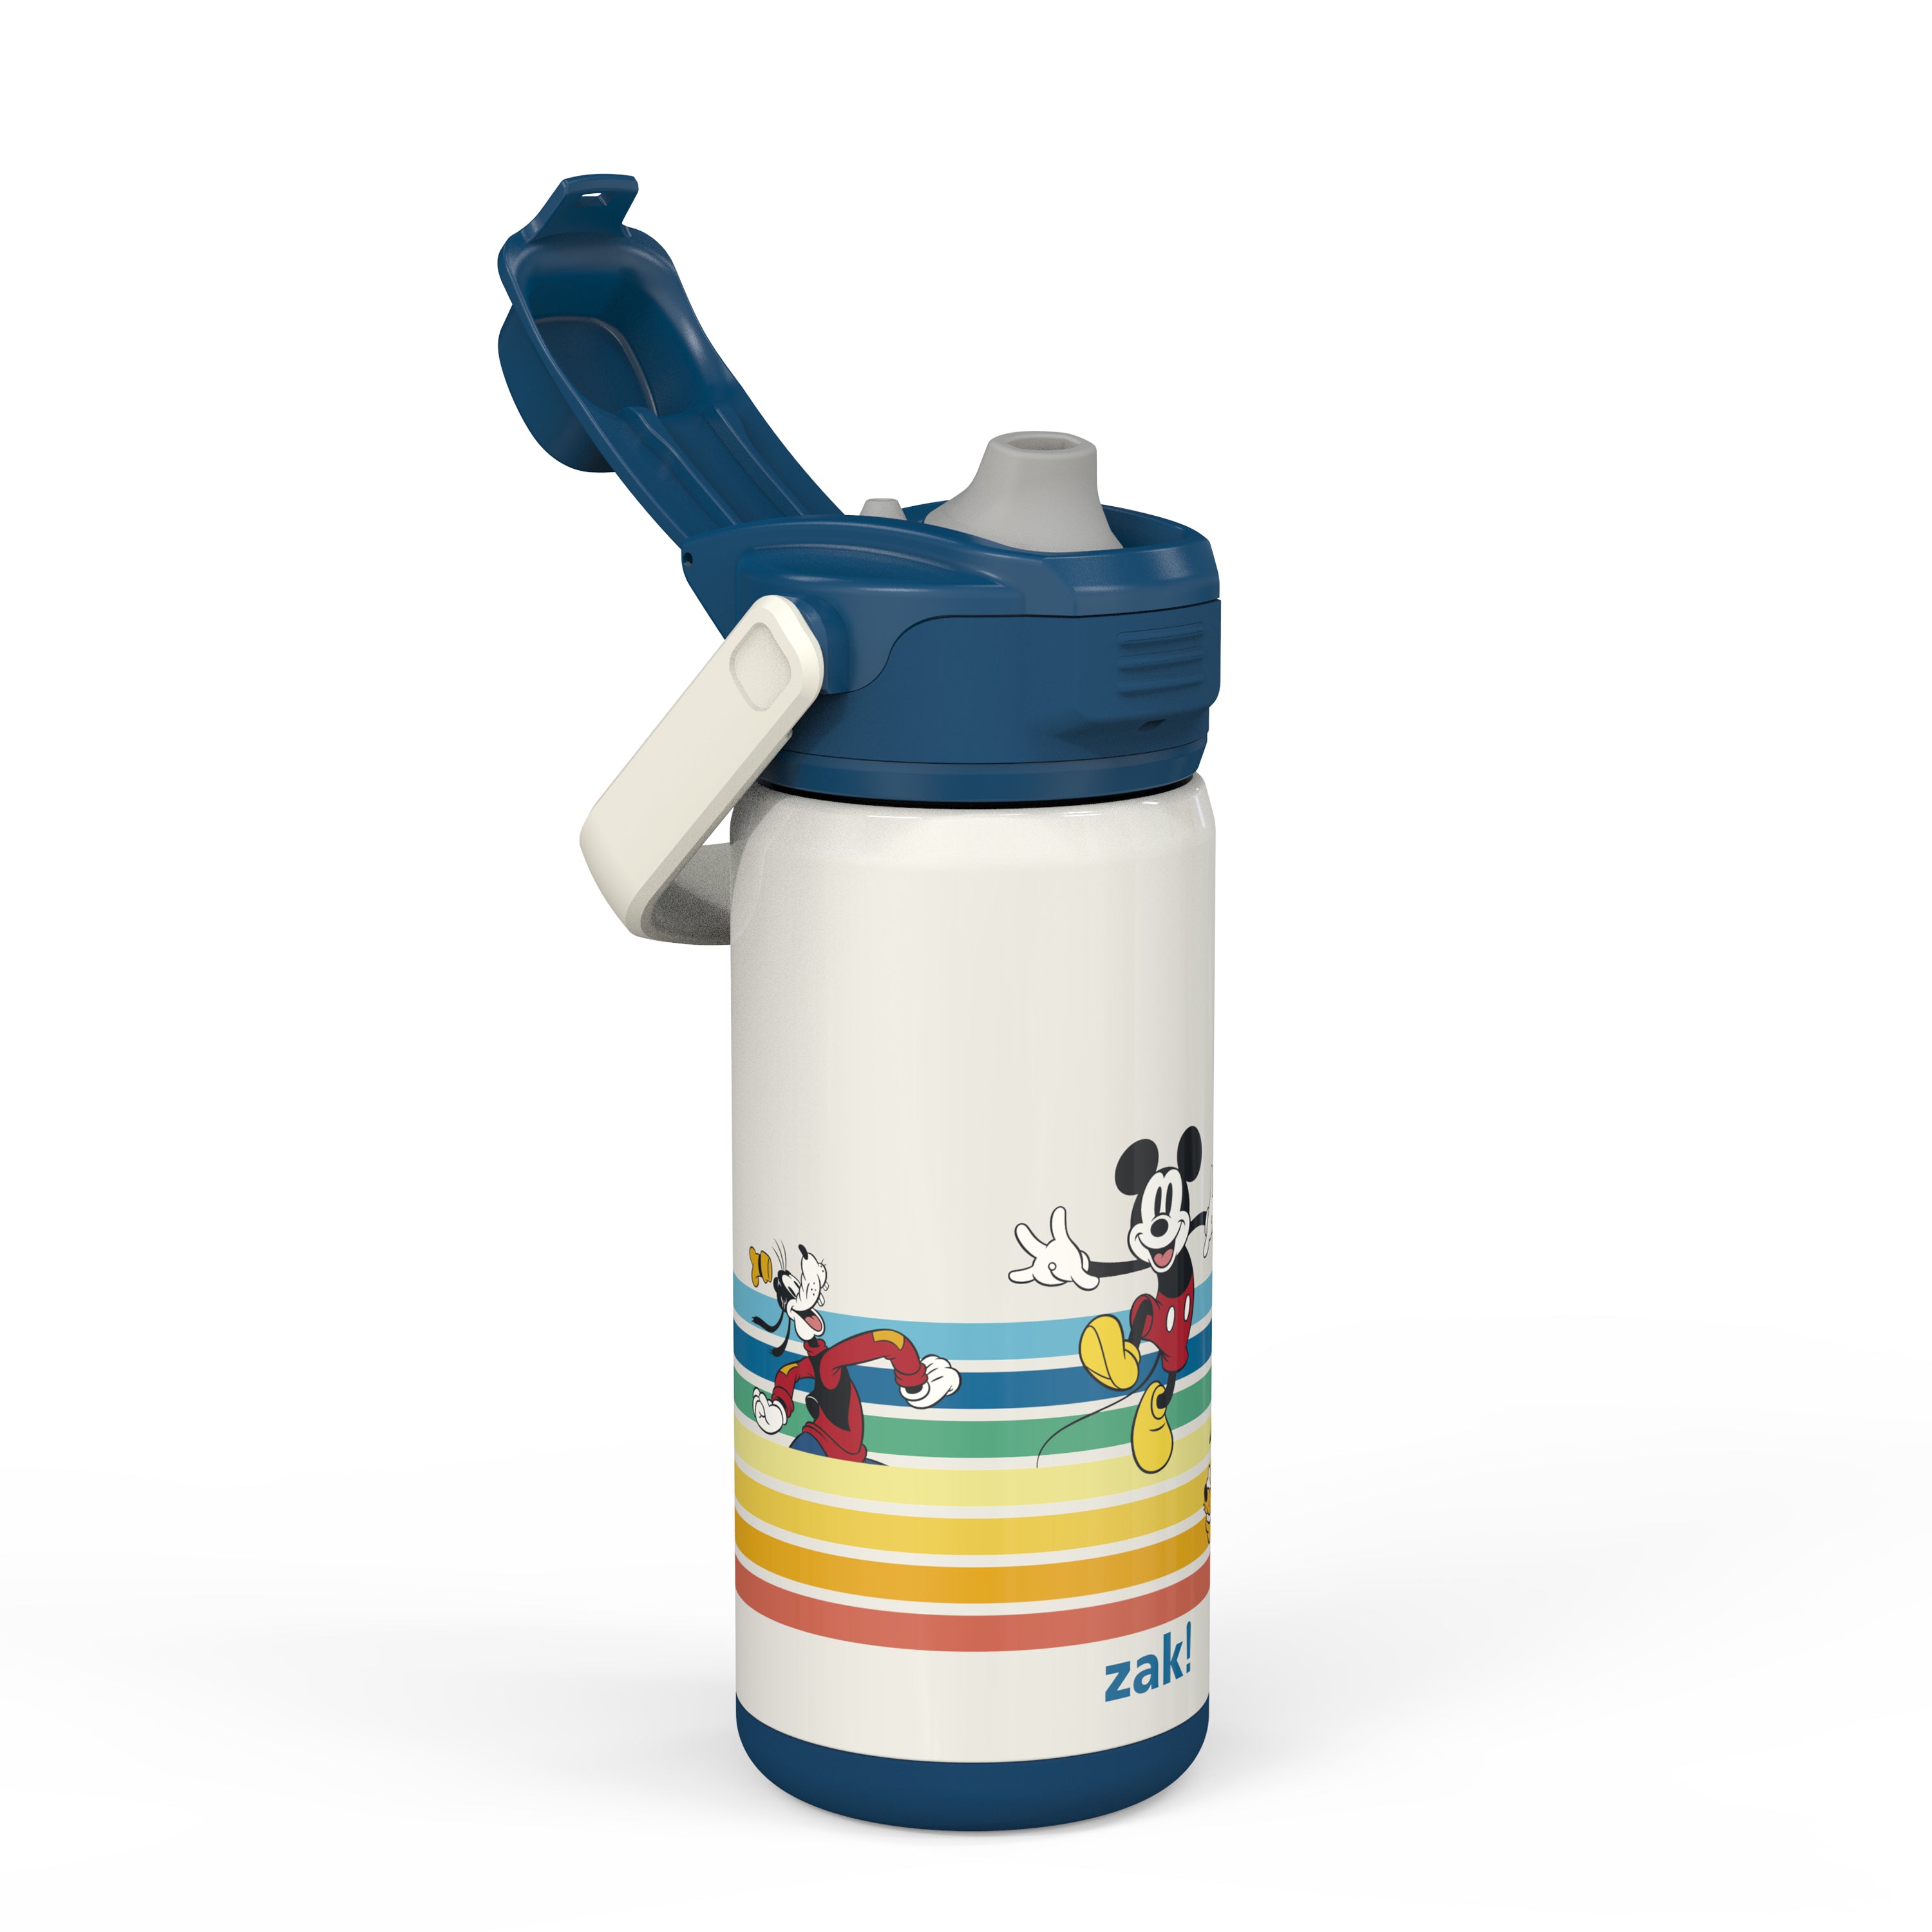 Mickey Mouse Stainless Steel Water Bottle with Built-In Straw